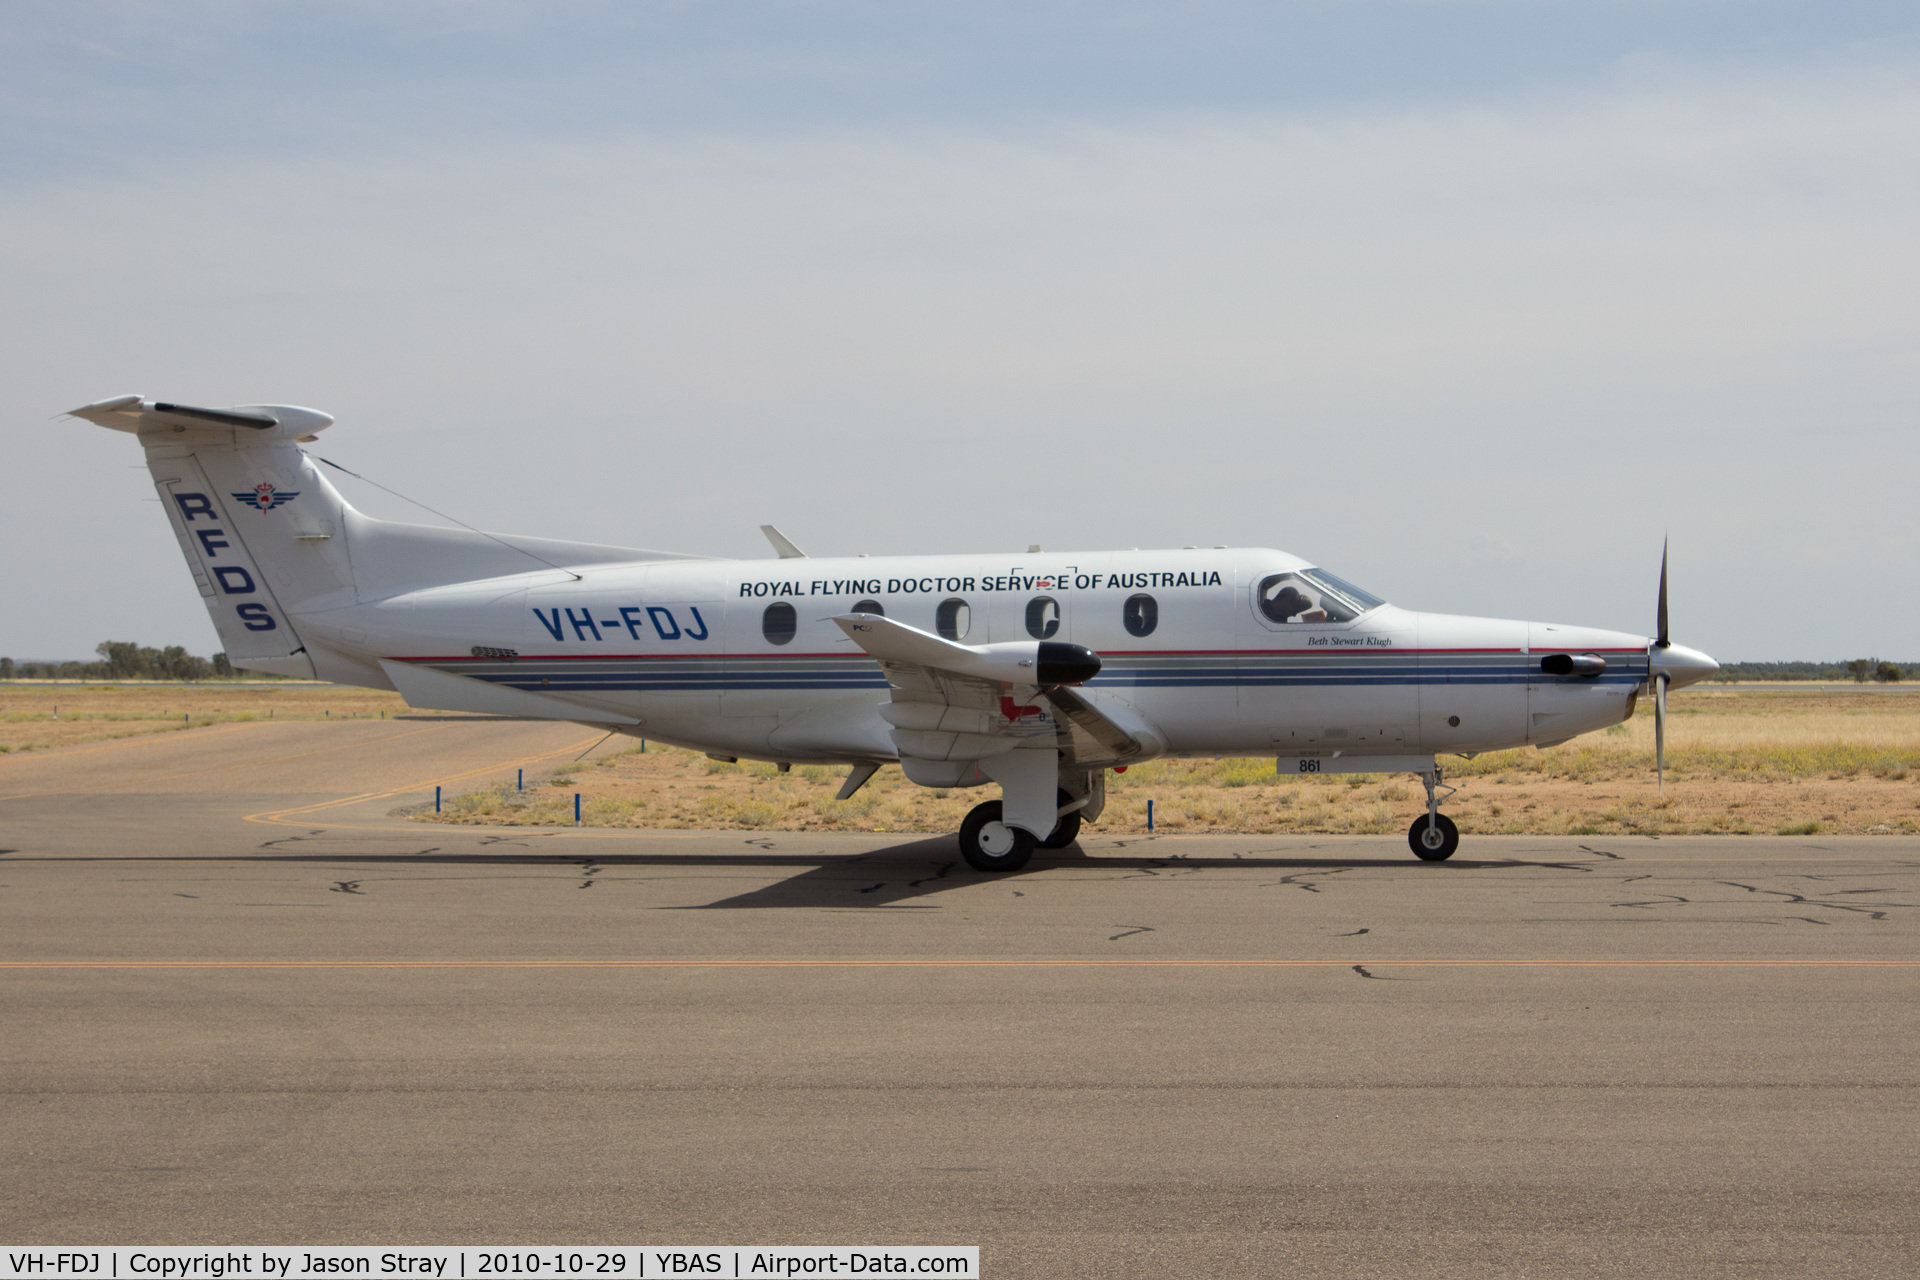 VH-FDJ, 2007 Pilatus PC-12/47 C/N 861, Taxiing to GA RFDS Parking YBAS Alice Springs, Arrival from YTNK